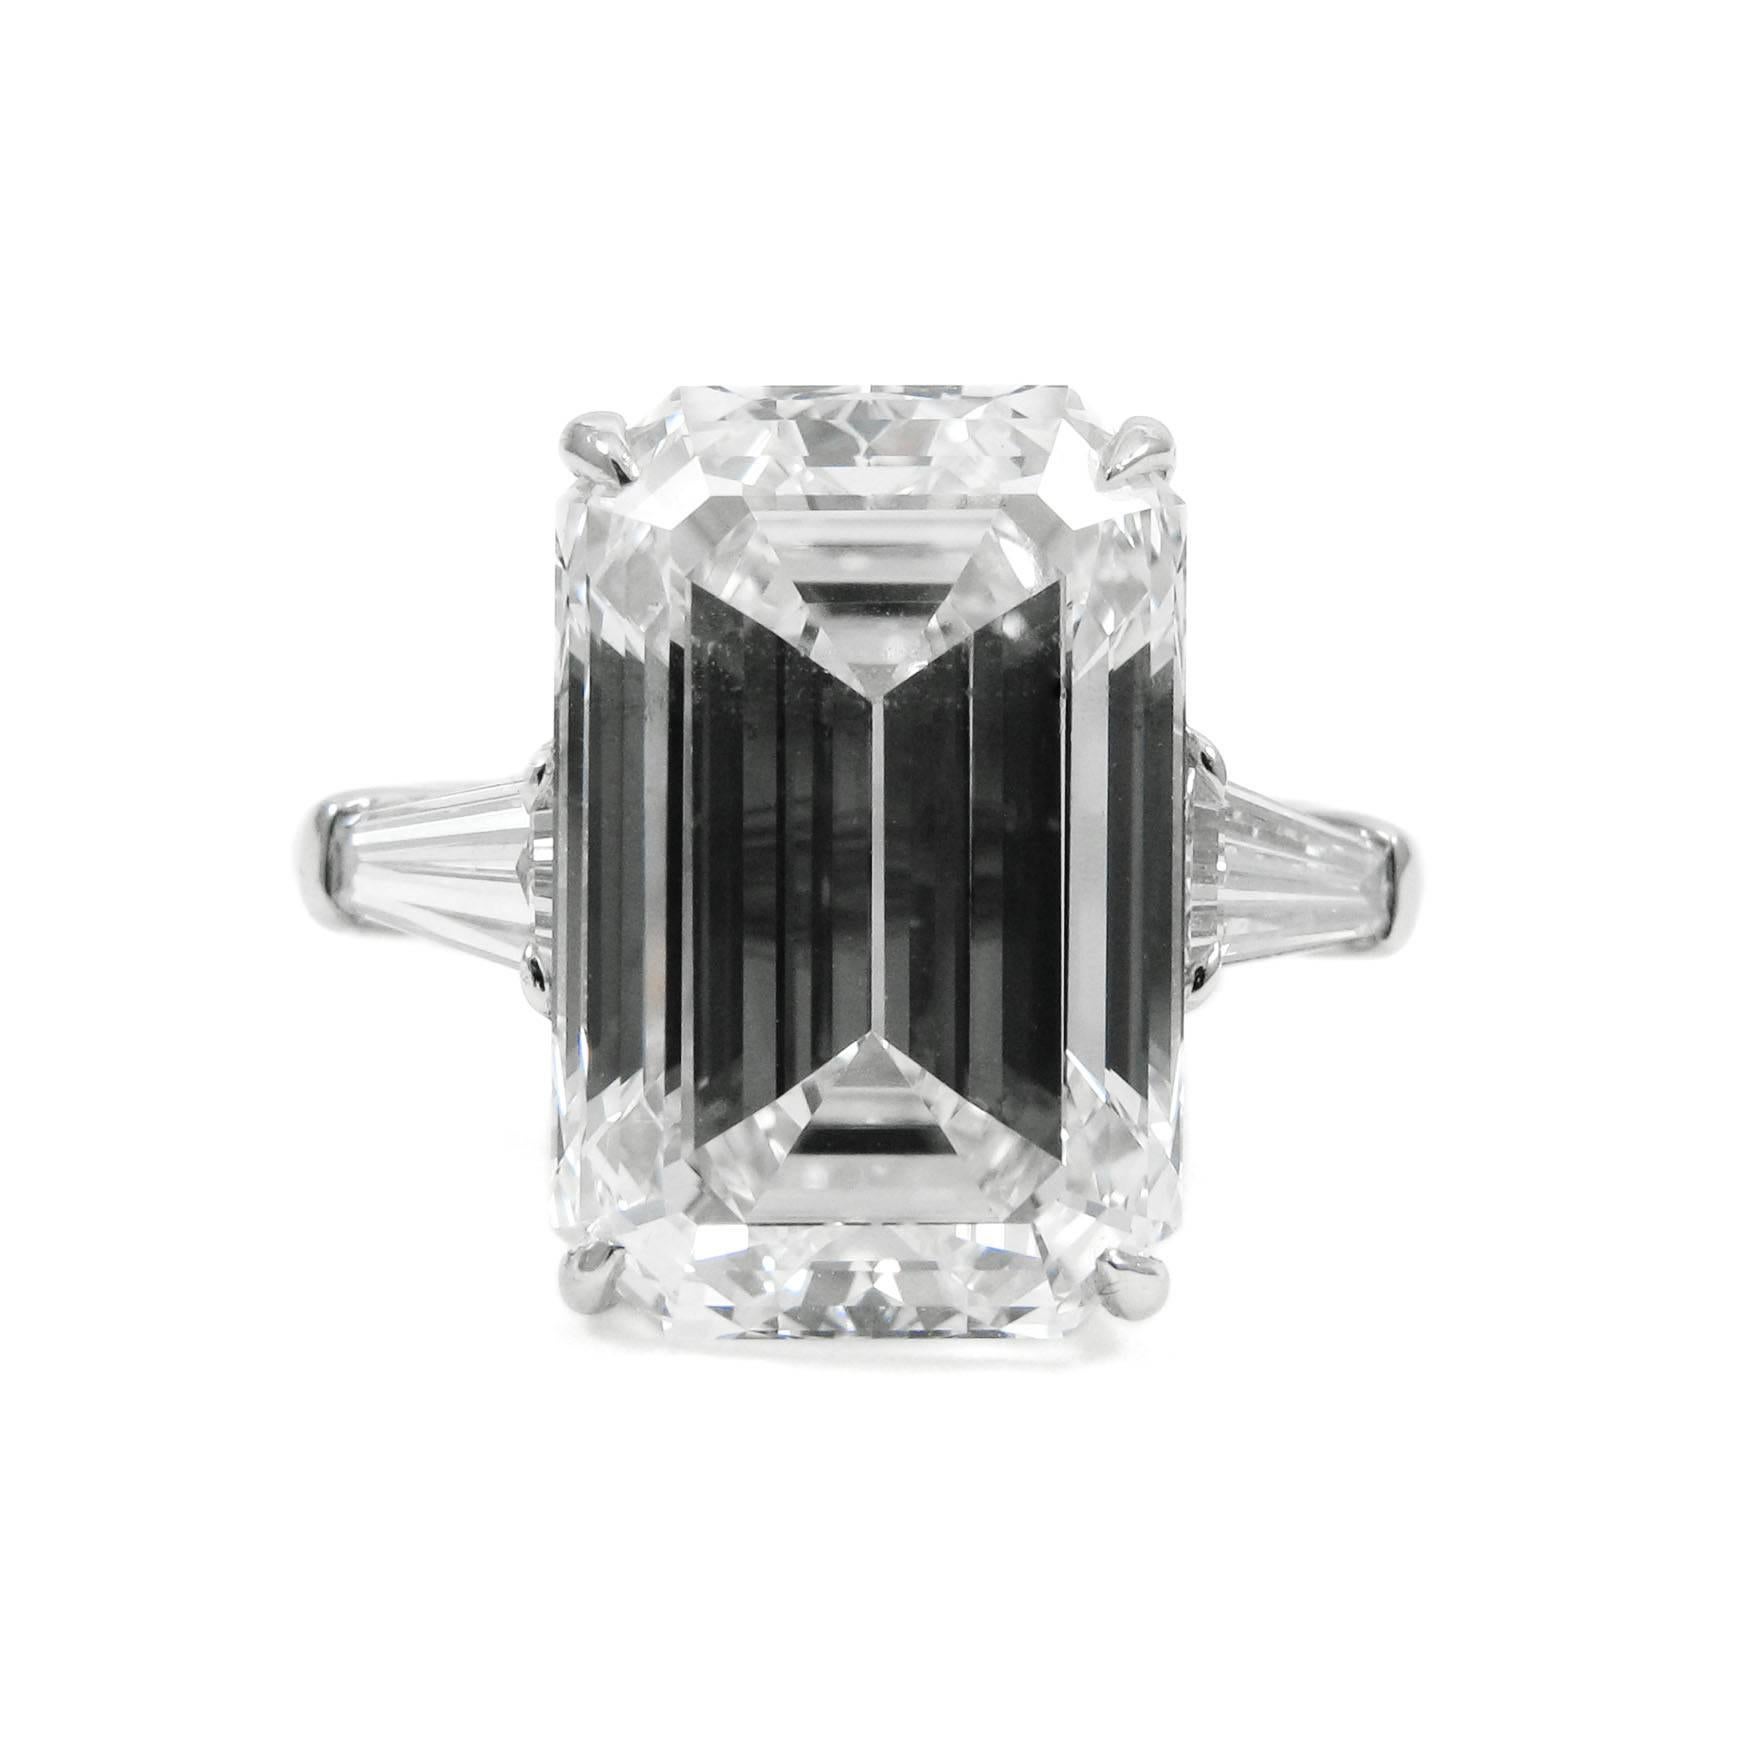 A classic style platinum ring set with a fabulous 8.00 carat emerald cut diamond with F color and SI1 clarity. The diamond is claw-set into a basket setting and flanked by two tapered baguette-cut diamonds totaling 0.64 carats in bar settings. An